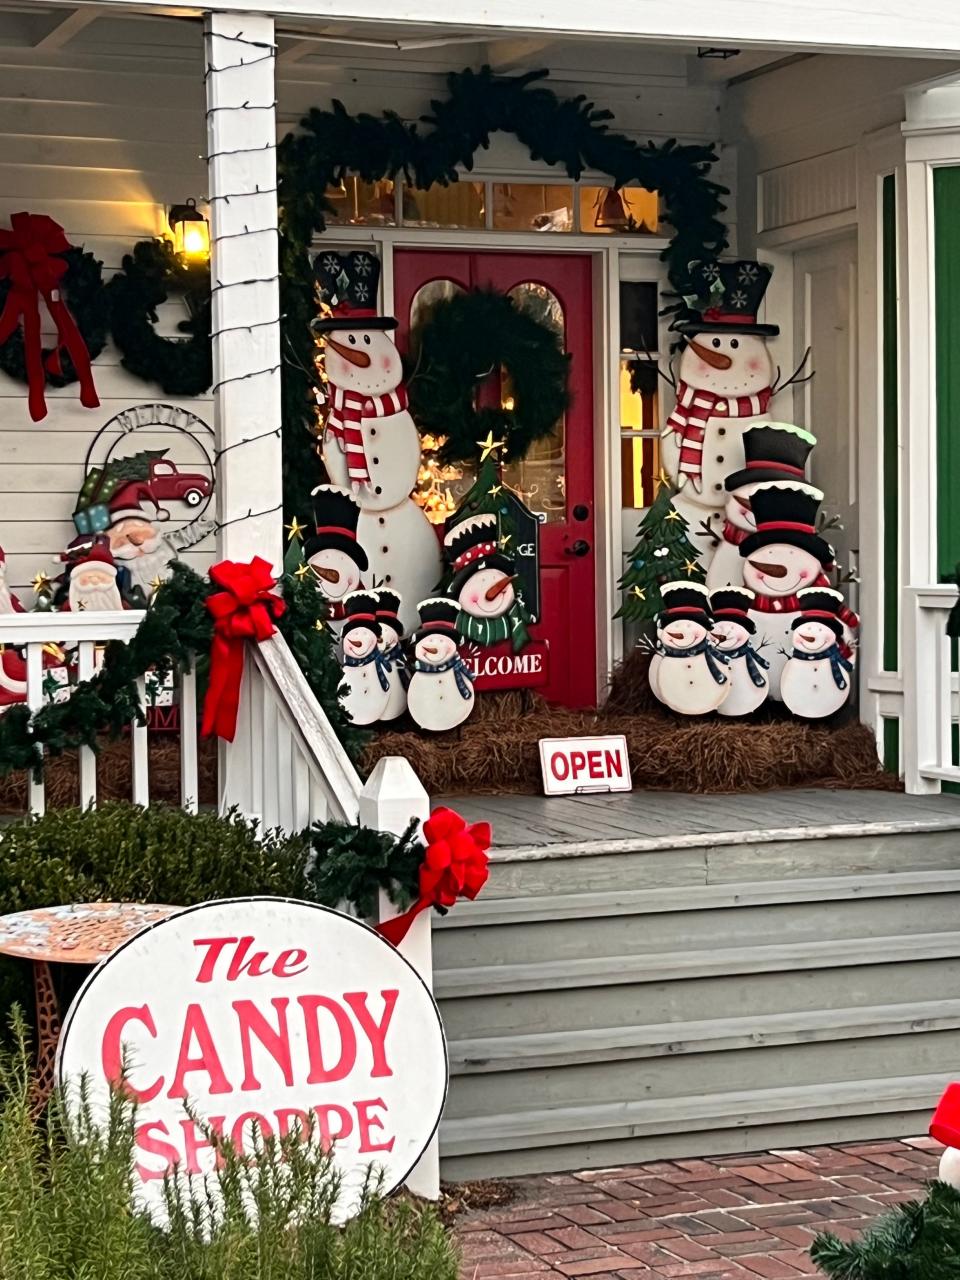 Snowmen and santas adorn the entrance of The Christmas House in downtown Southport on Wednesday, November 30, 2022.